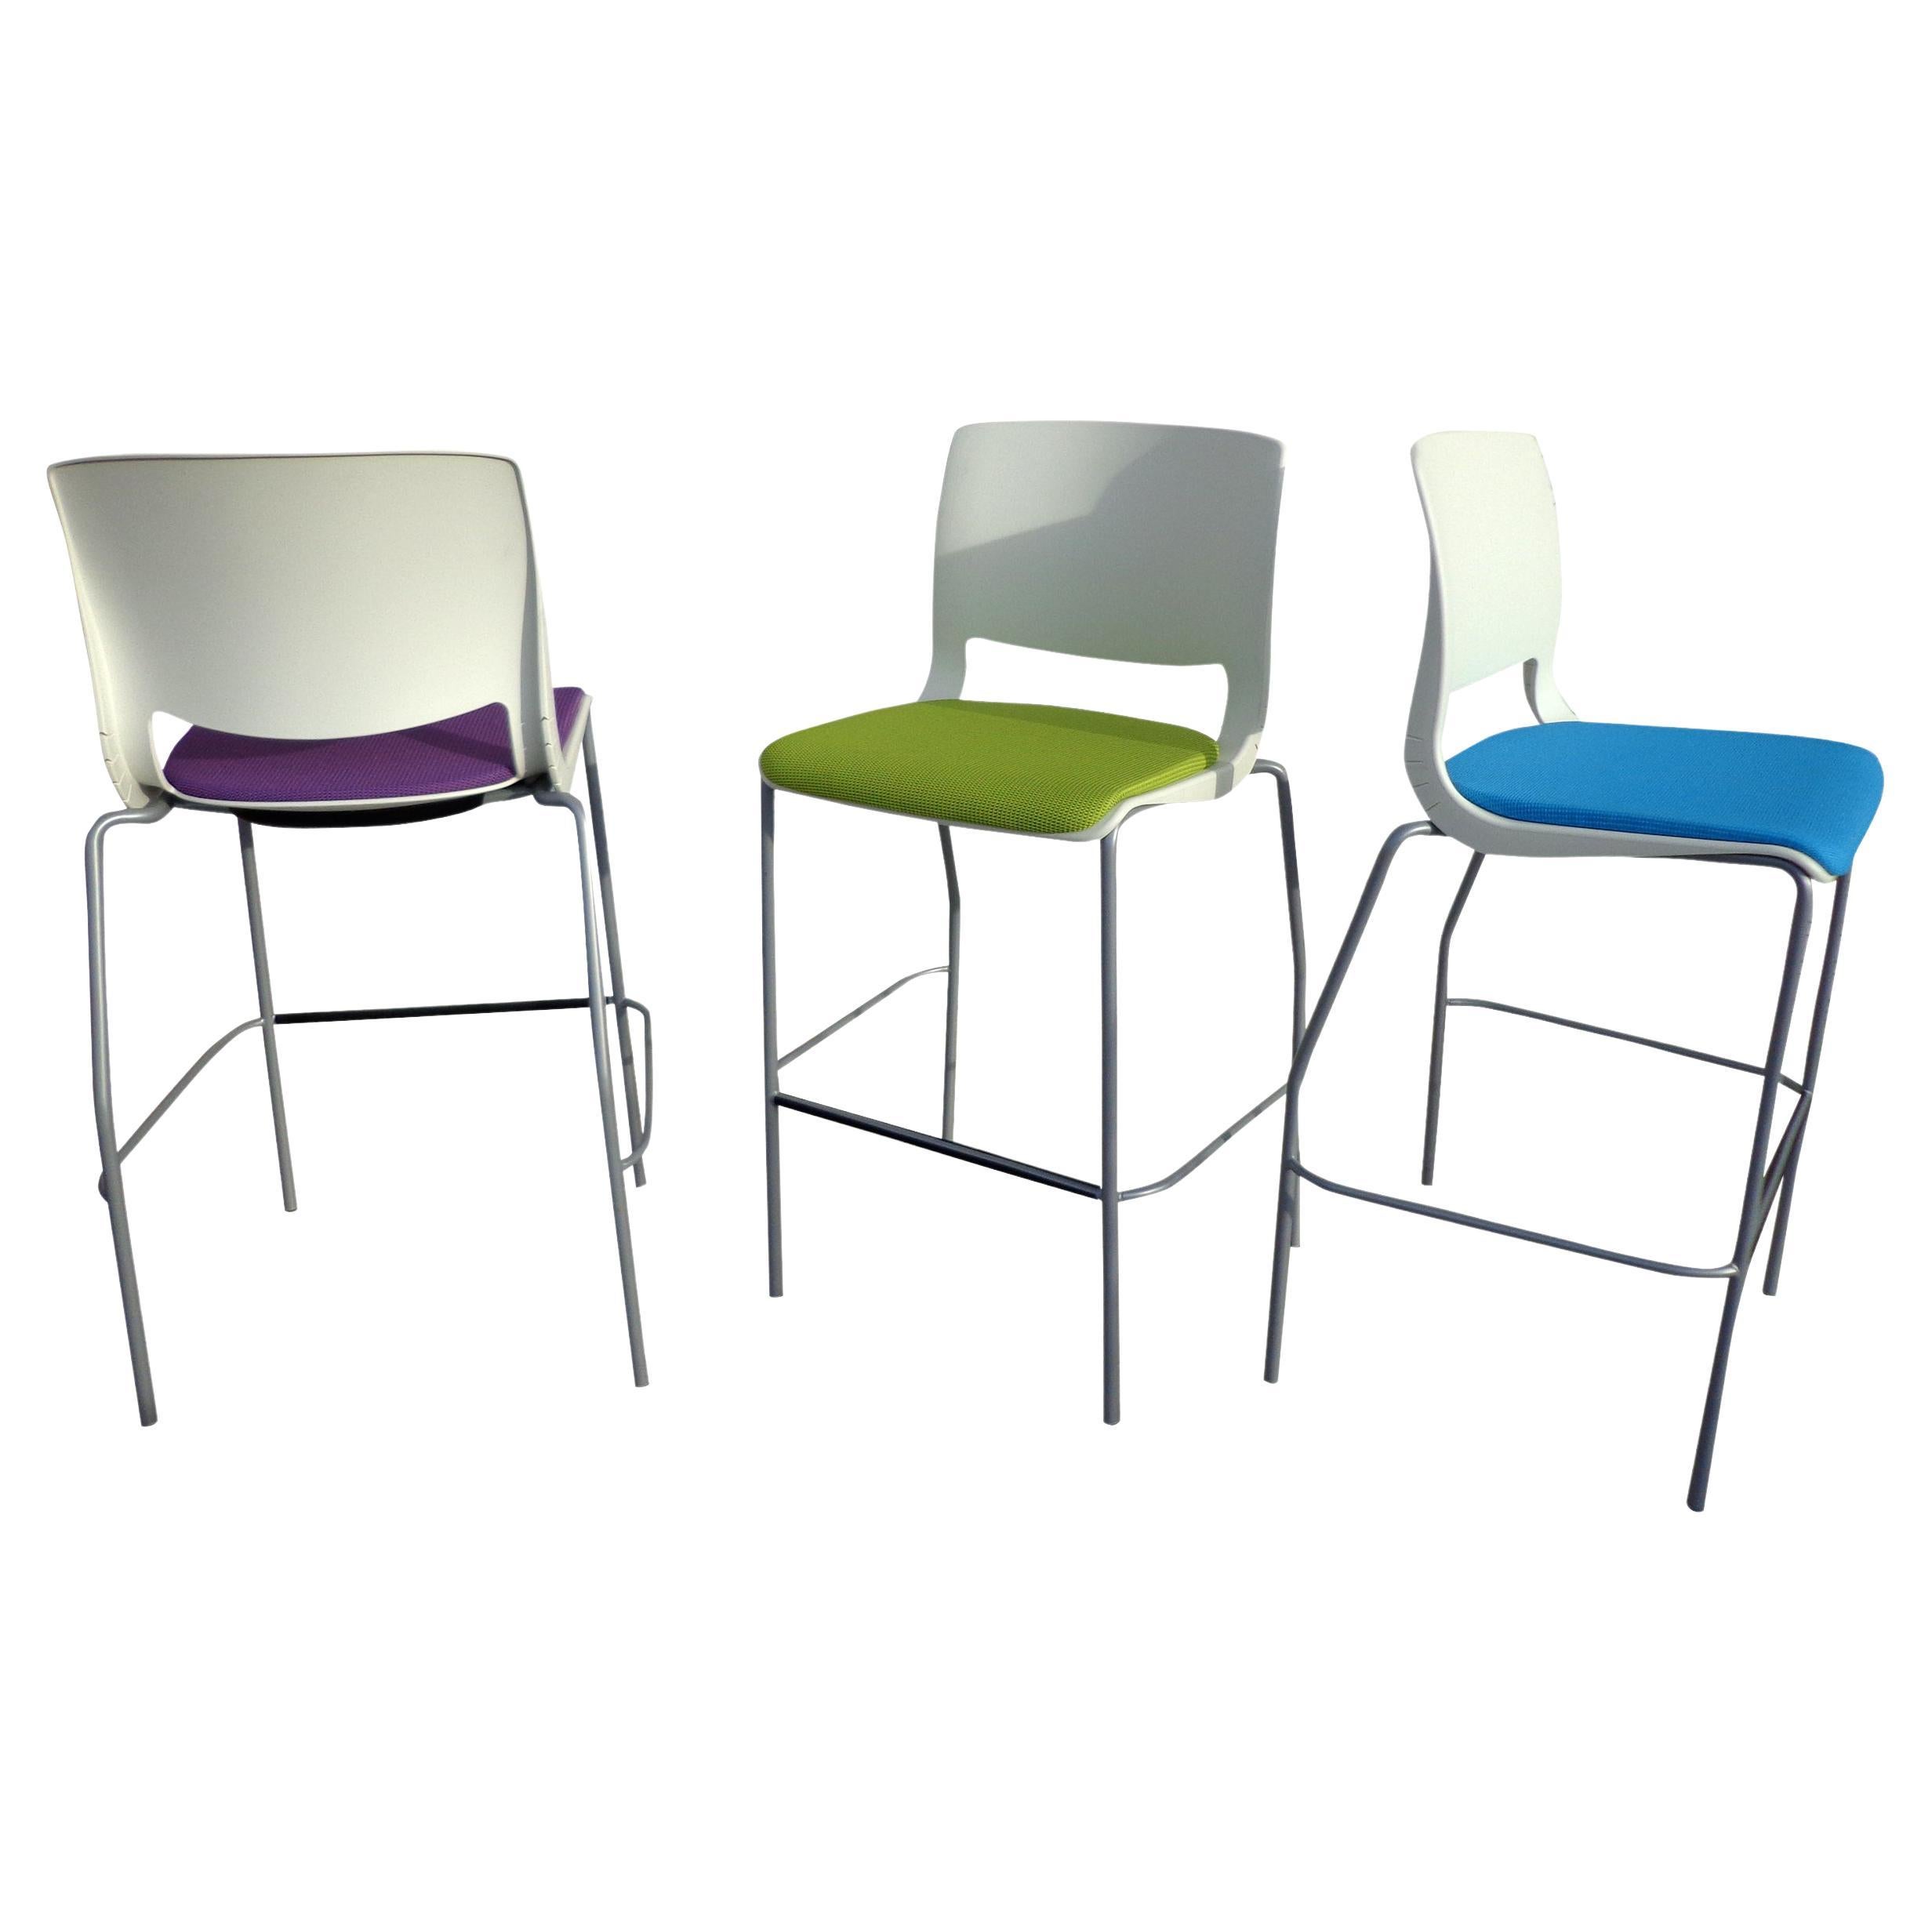 1 Teknion Variable Stool by Alessandro Piretti For Sale